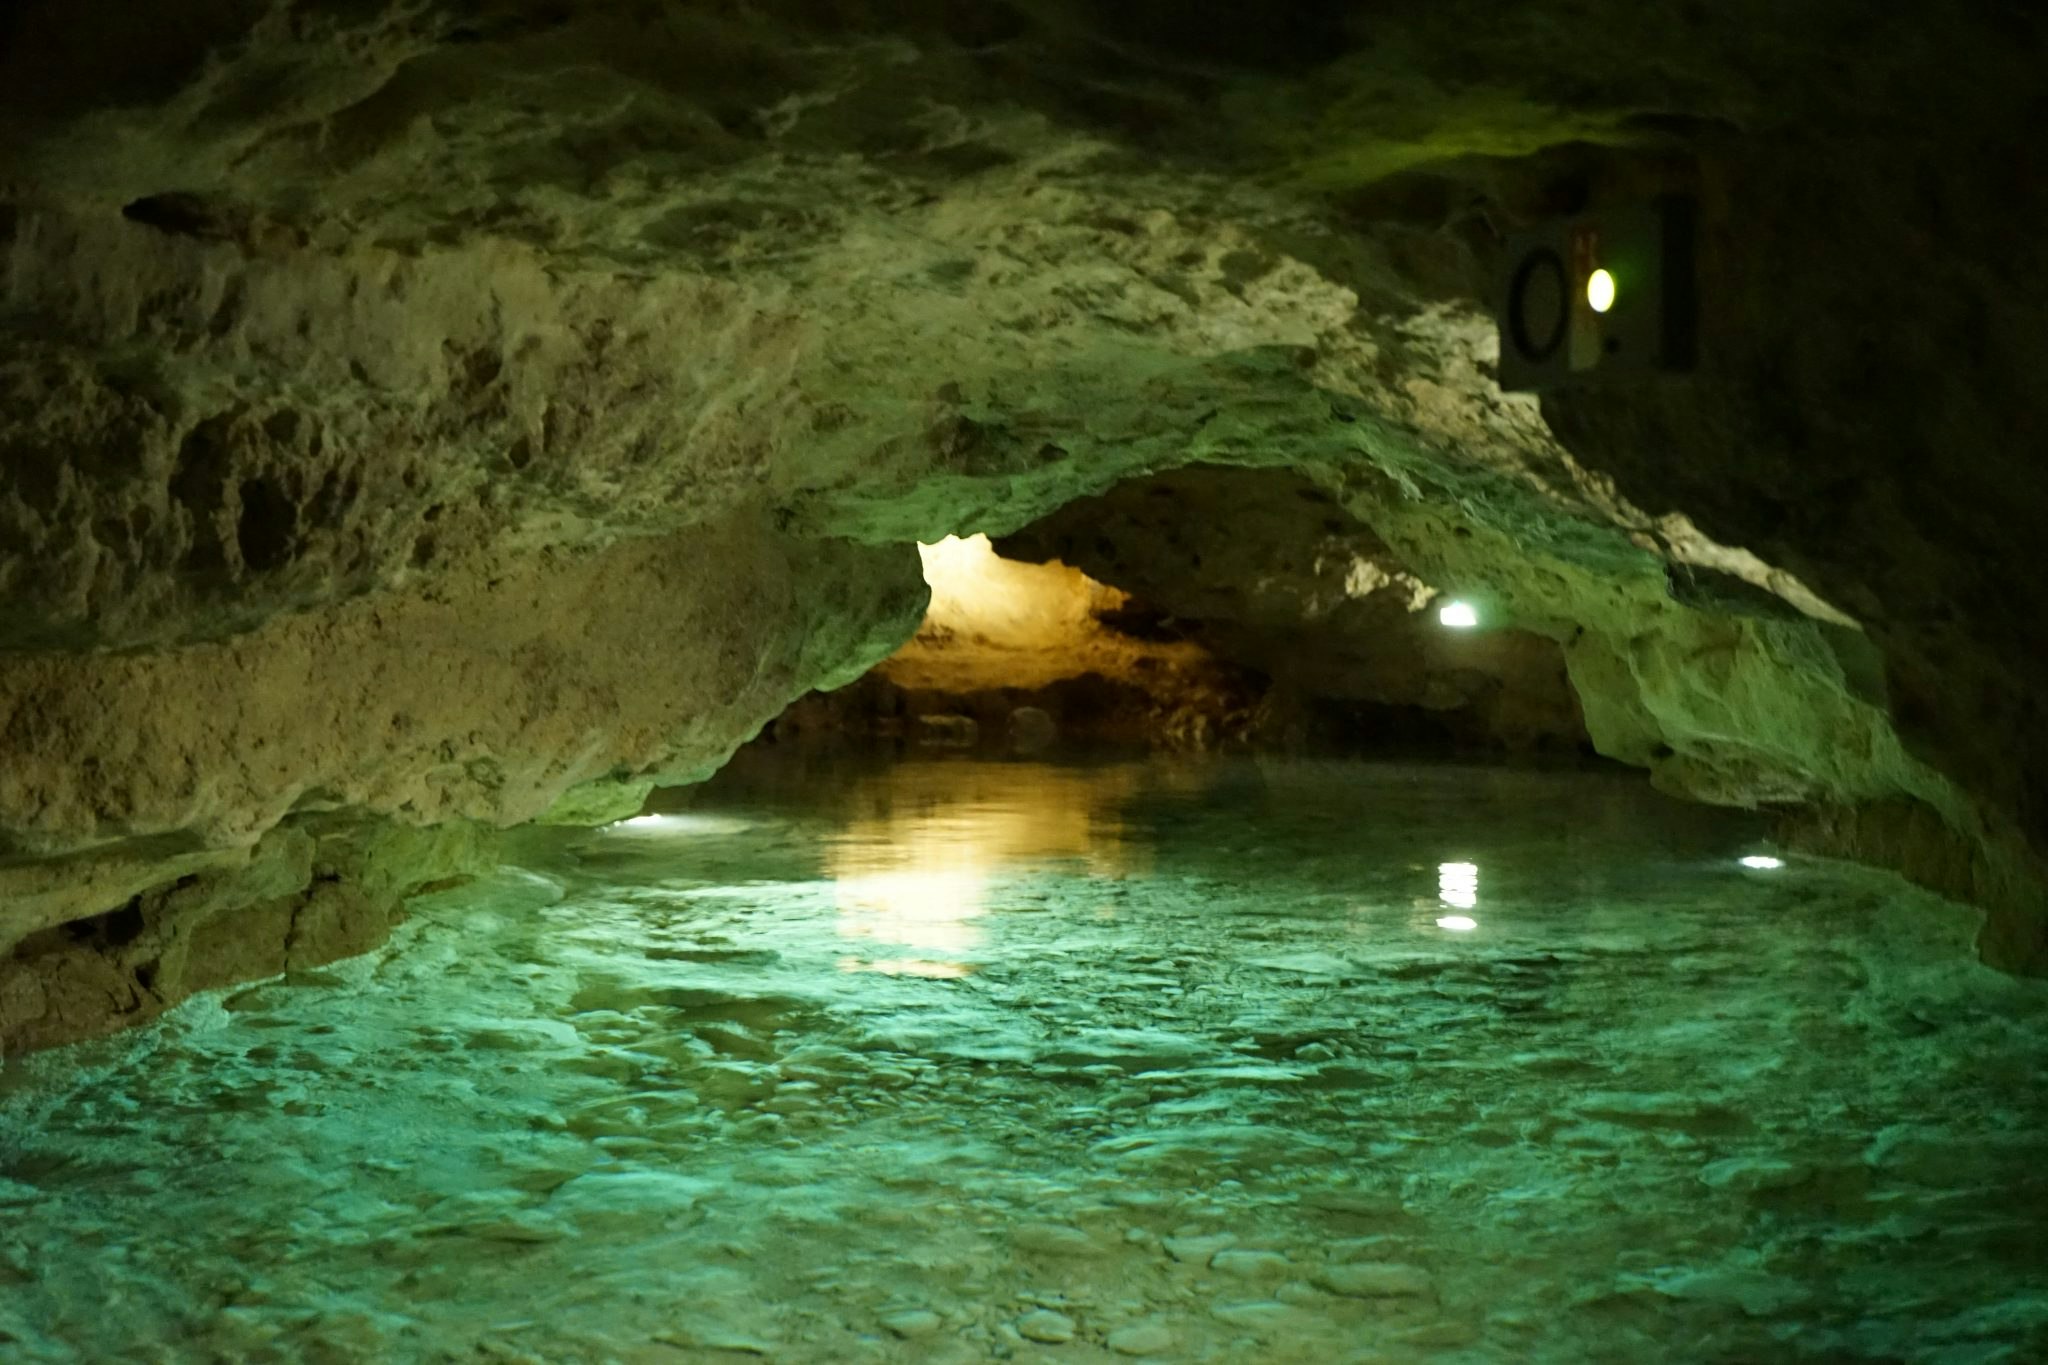 Image from inside a cave lake, metres below the town of Tapolca in Hungary.